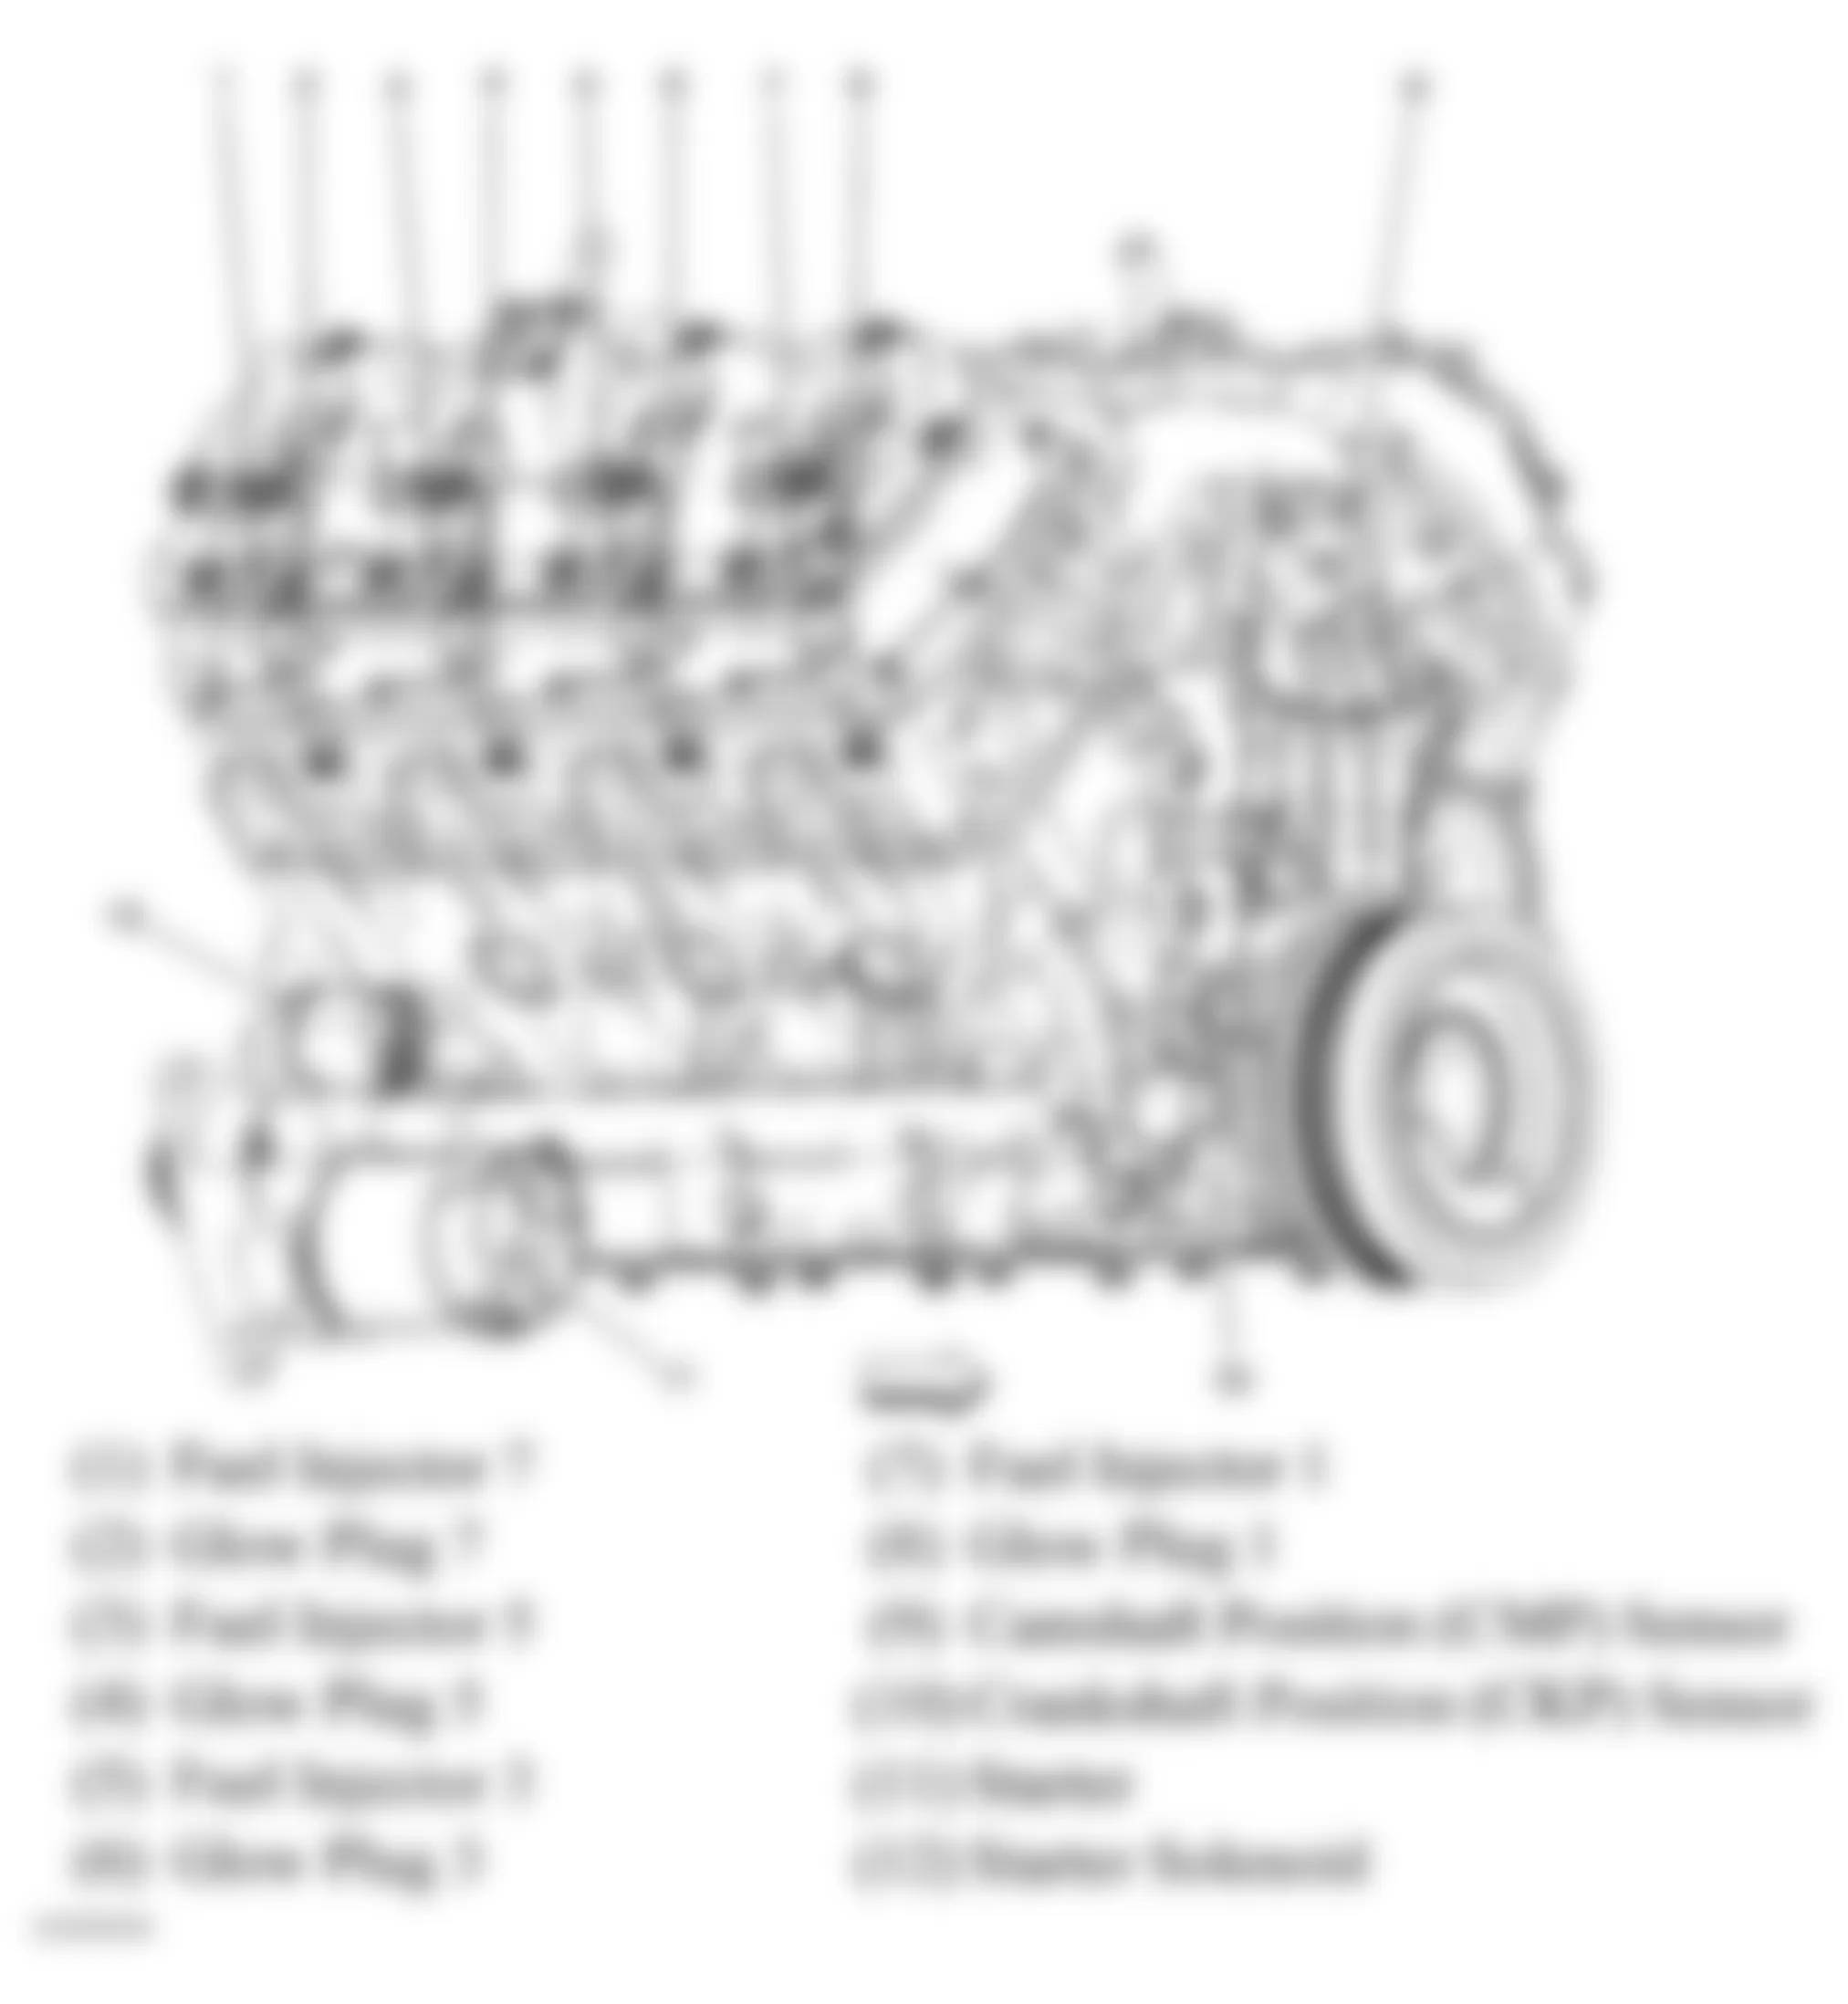 GMC Savana H1500 2010 - Component Locations -  Right Side Of Engine (6.6L)